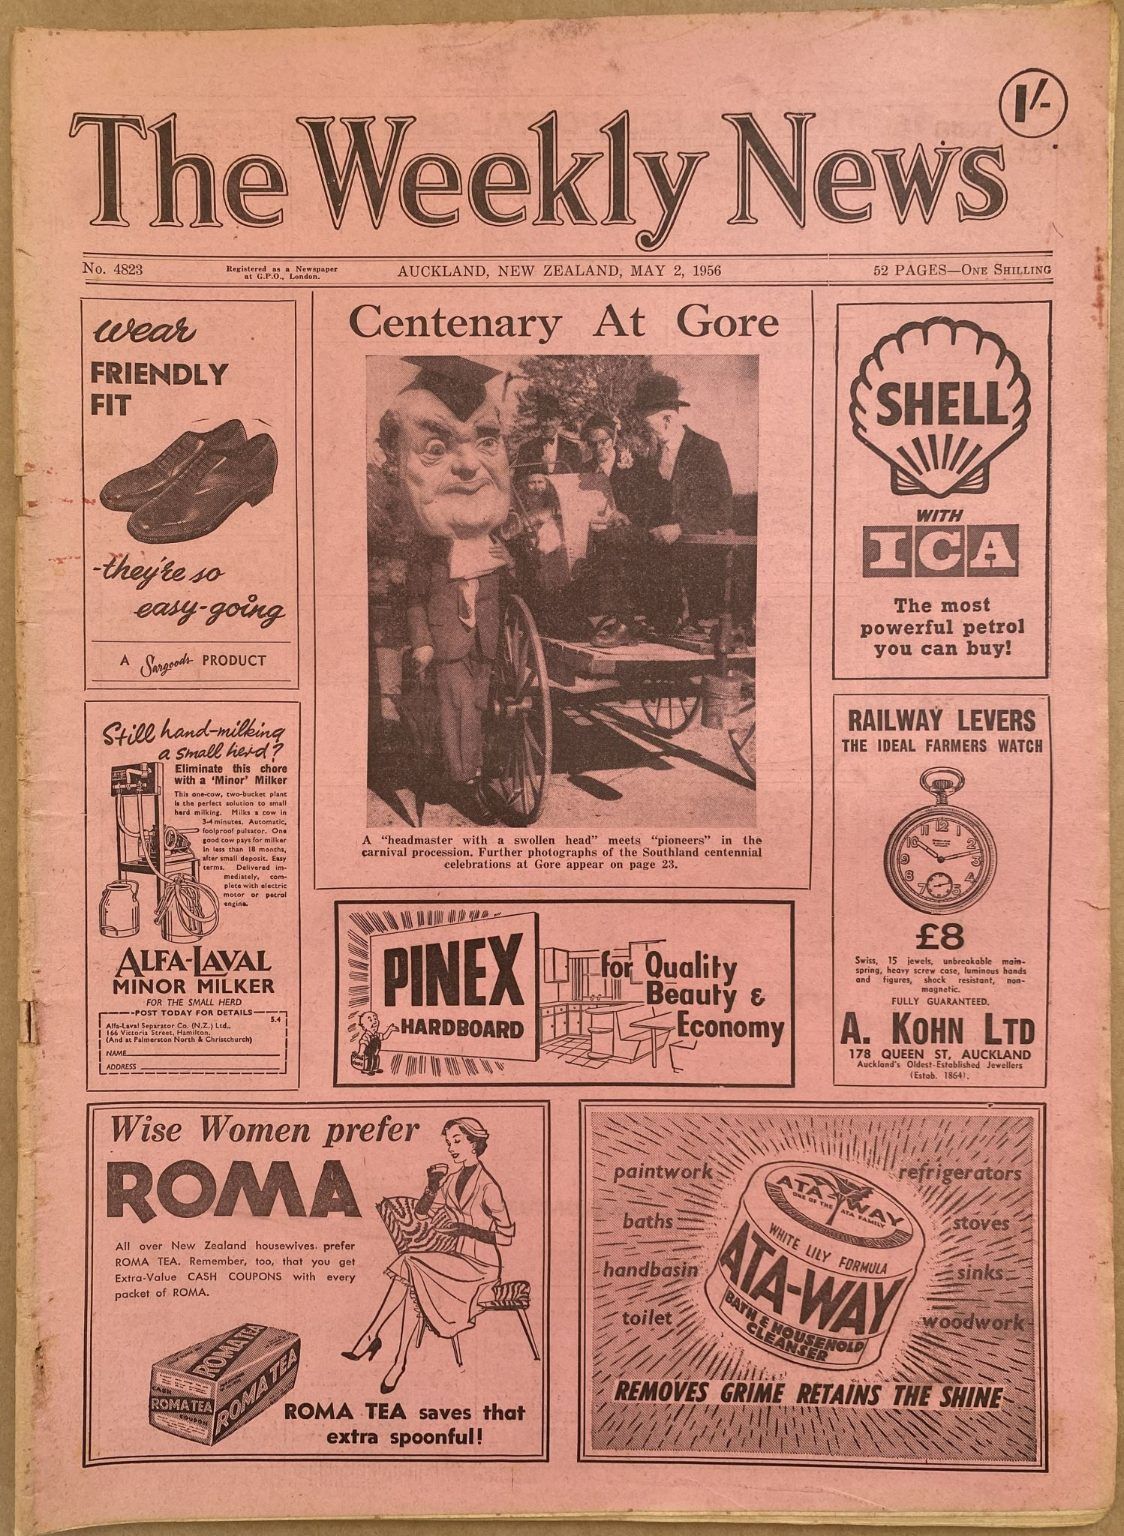 OLD NEWSPAPER: The Weekly News - No. 4823, 2 May 1956